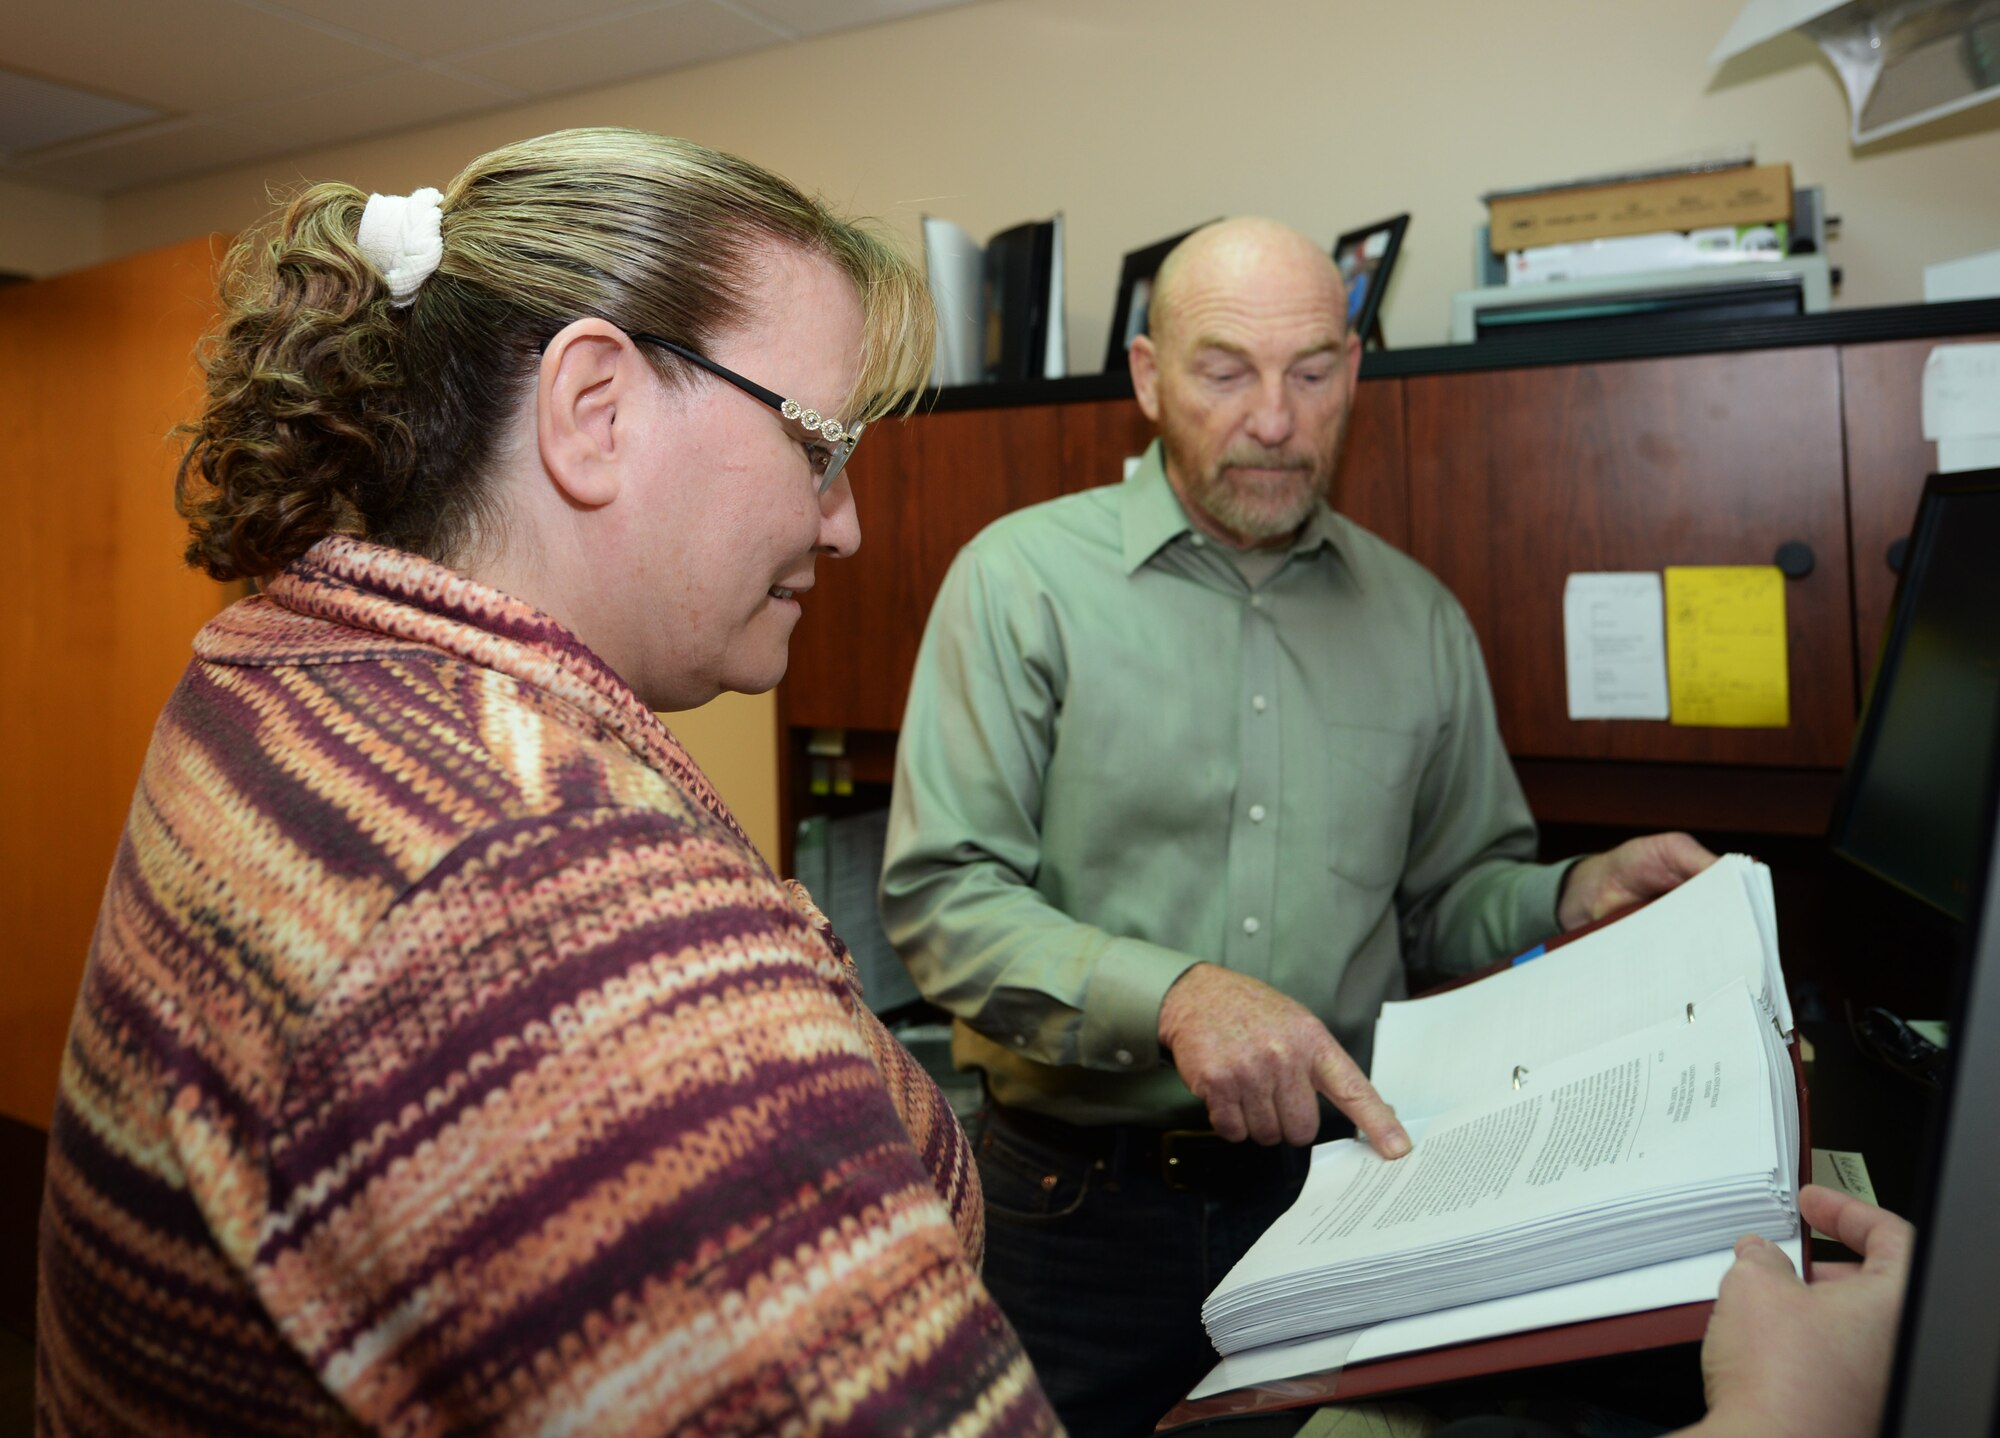 Kimberly Kohler, the Family Advocacy outreach manager, and David Butler, a Family Advocacy Program Assistant with the 28th Medical Group, look over instructions at Ellsworth Air Force Base, S.D., Nov. 8, 2017. The Family Advocacy Program is located inside the Mental Health Clinic, where the group meets with individuals who need help or advice with marriage, finances or new families. (U.S. Air Force photo by Airman 1st Class Thomas Karol)